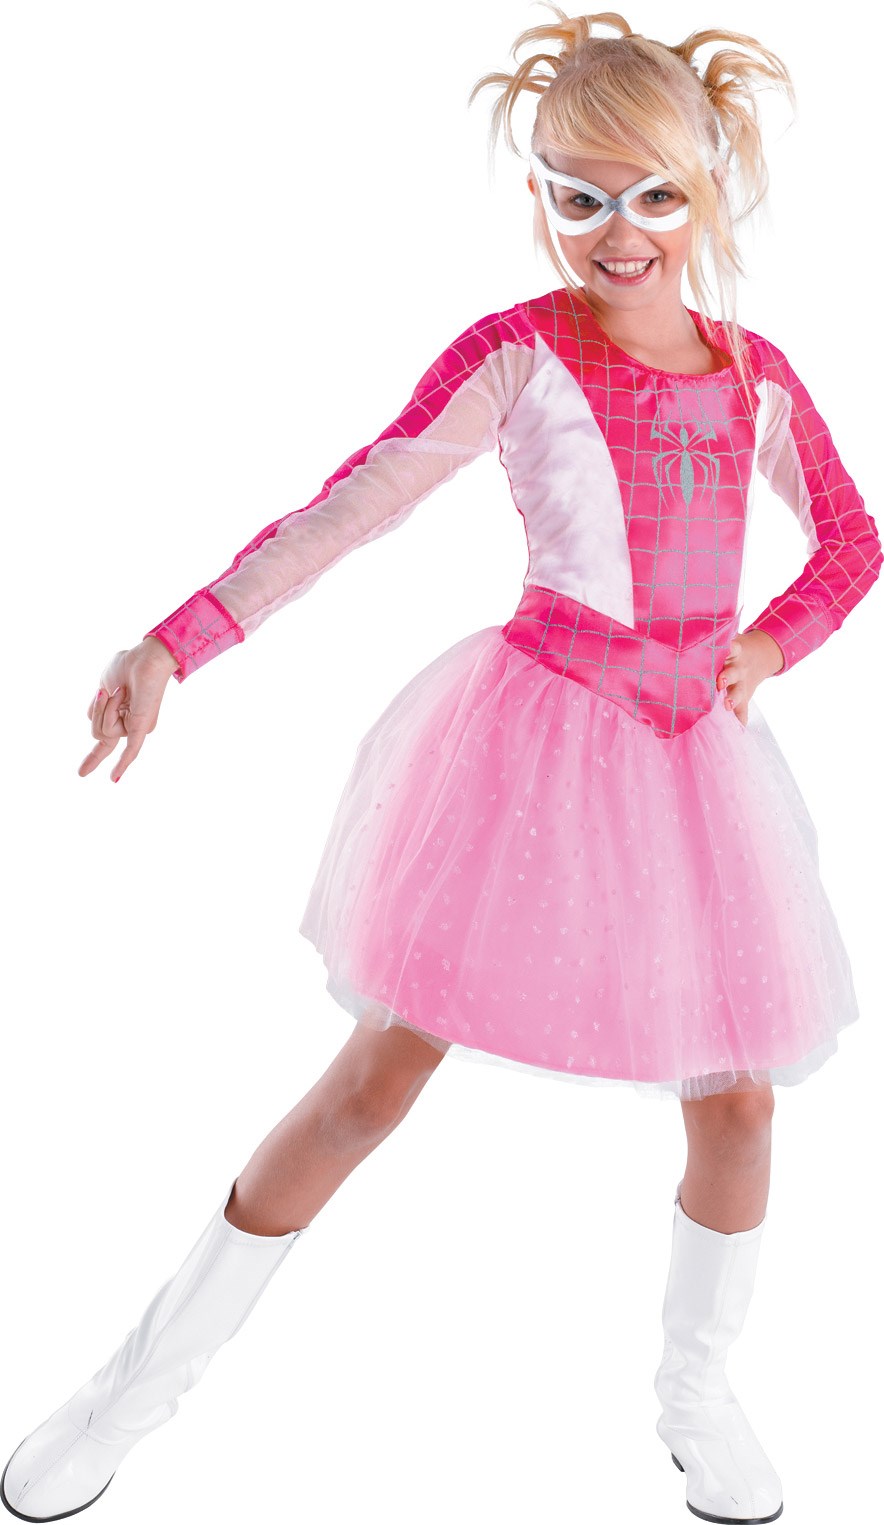 Spider-Girl Pink Classic Toddler / Child Costume